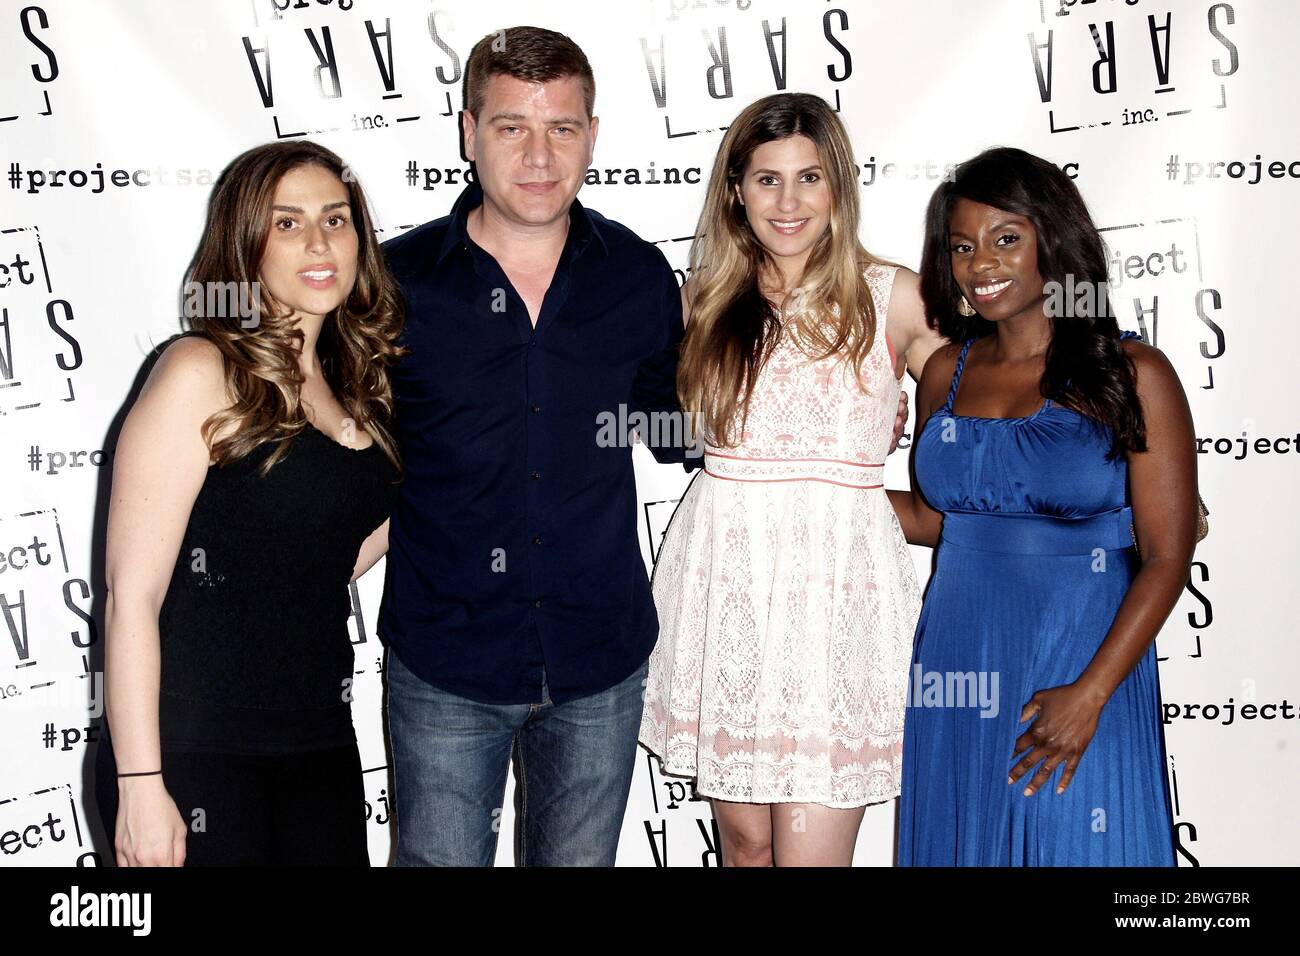 New York, NY, USA. 11 June, 2015. Z-100 NY overnight radio host, Shelley Rome, Entertainment reporter for Fox Broadcasting's The Fox Morning Extra, Tom Murro, Associate Producer at NBC Universal's Bravo TV, Chanel Omari, Co-host of VH1's morning show 'The Gossip Table', Delaina Dixon at the Launch Of Dining Reconstructed: An Off Menu Experience at The Starrett Leigh Building. Credit: Steve Mack/Alamy Stock Photo